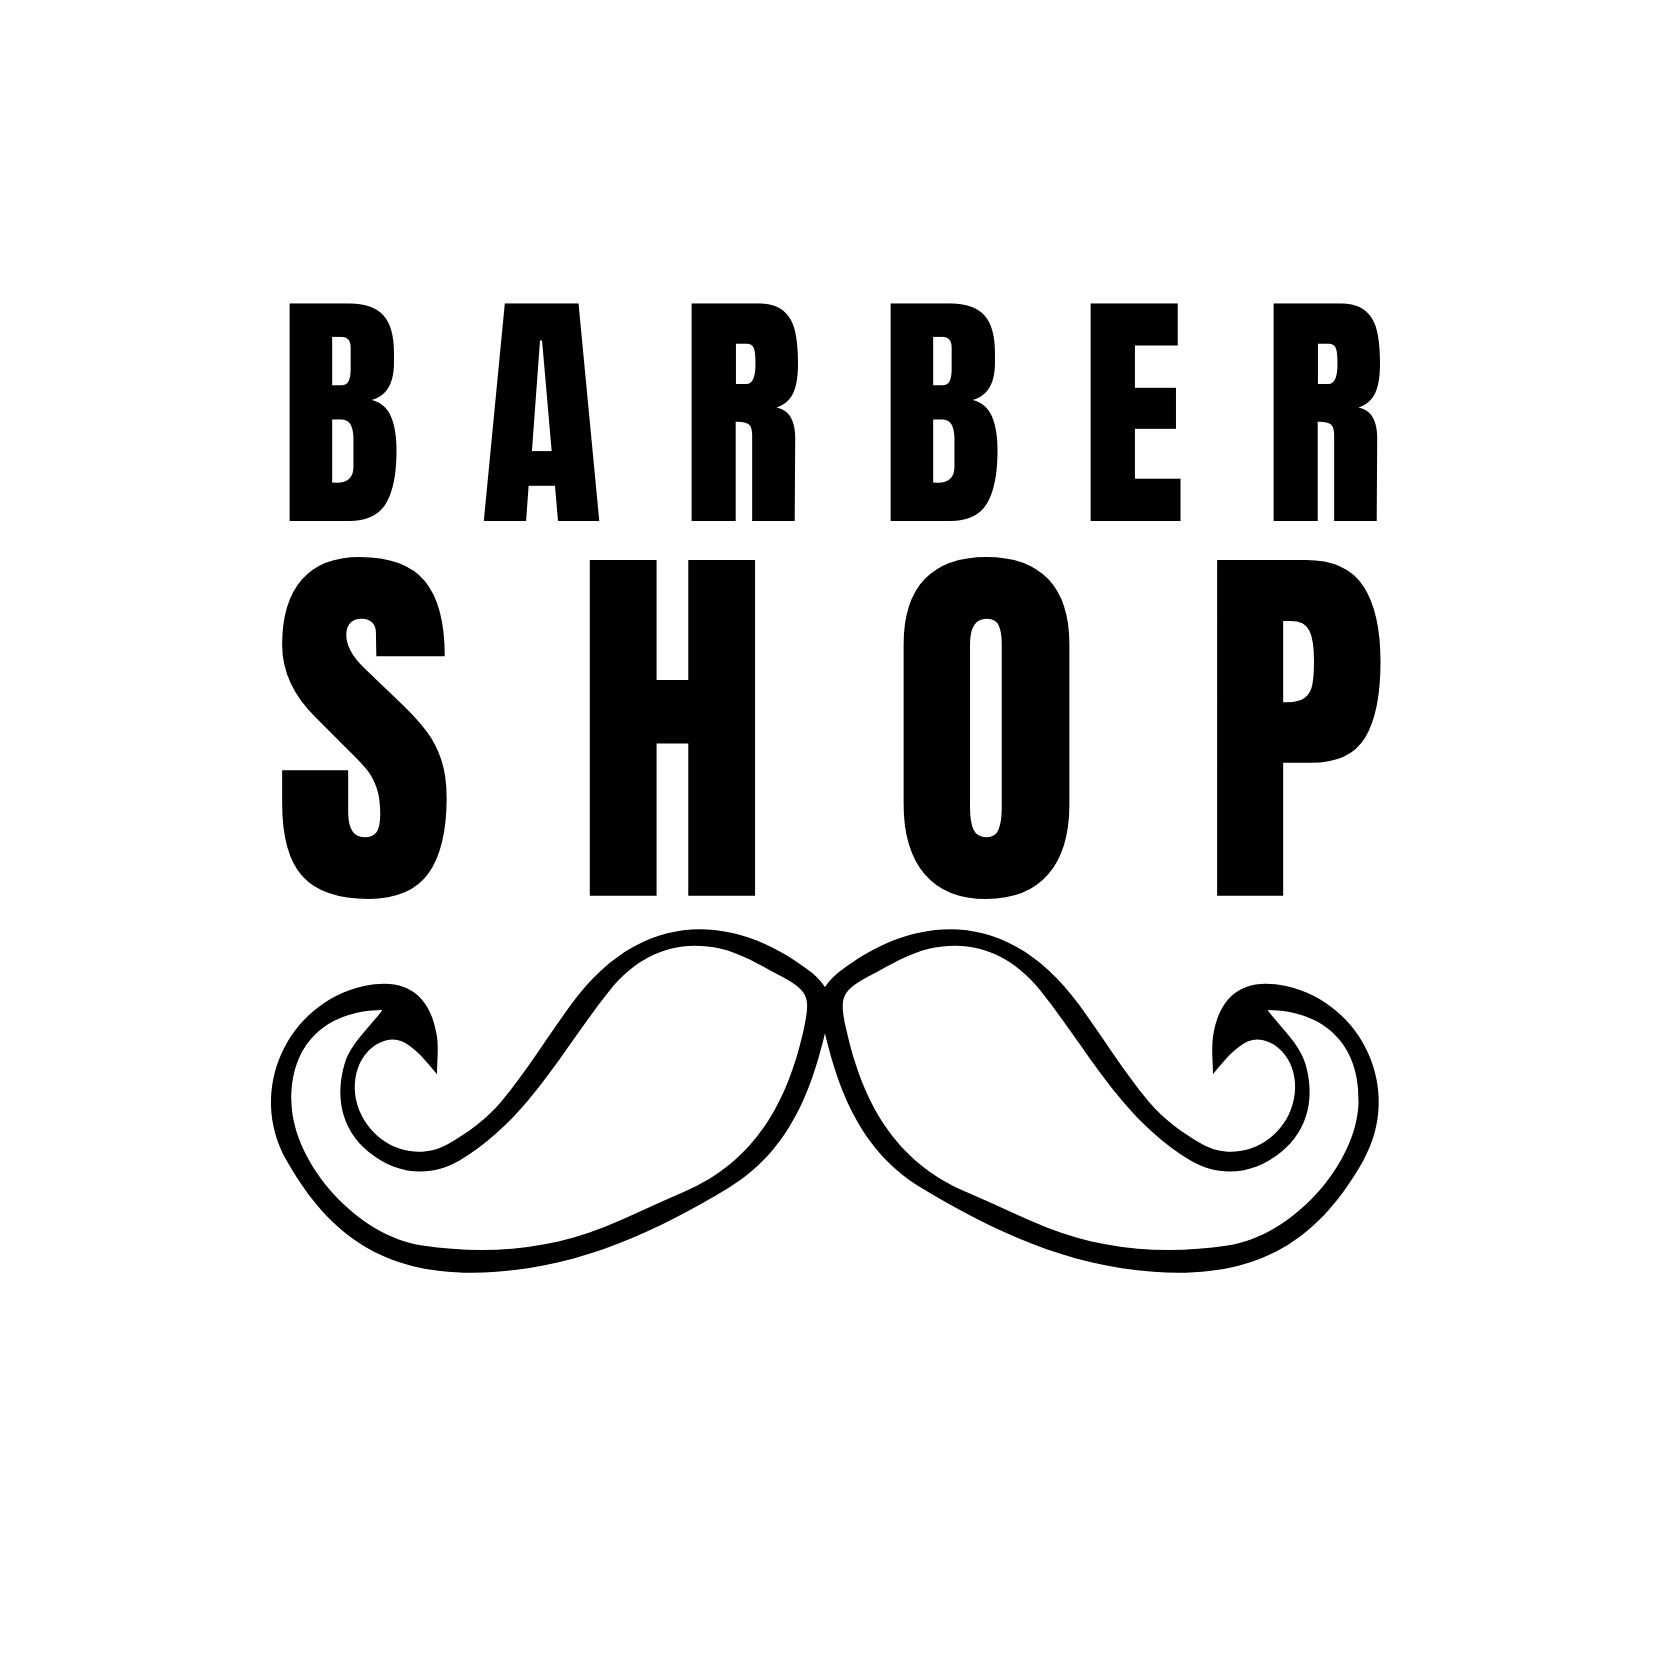 Barbershop logo with mustache - Draw attention to your logo with bold Anton font - Image